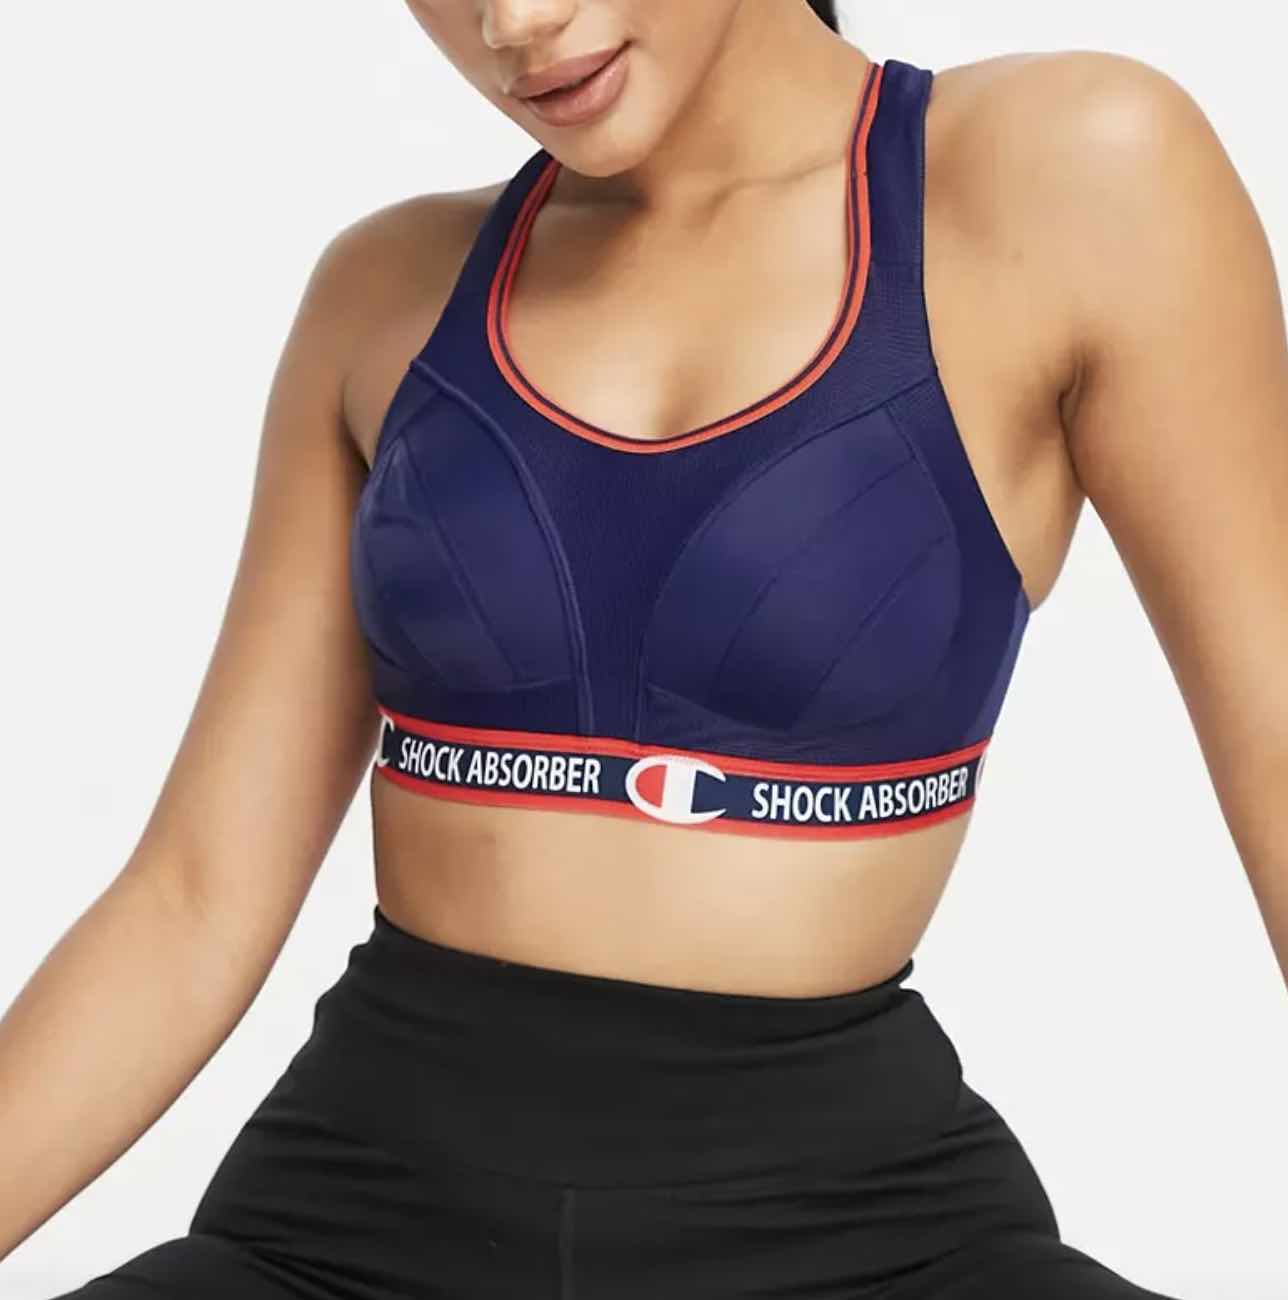 Champion White Crop Top, Shock Absorber